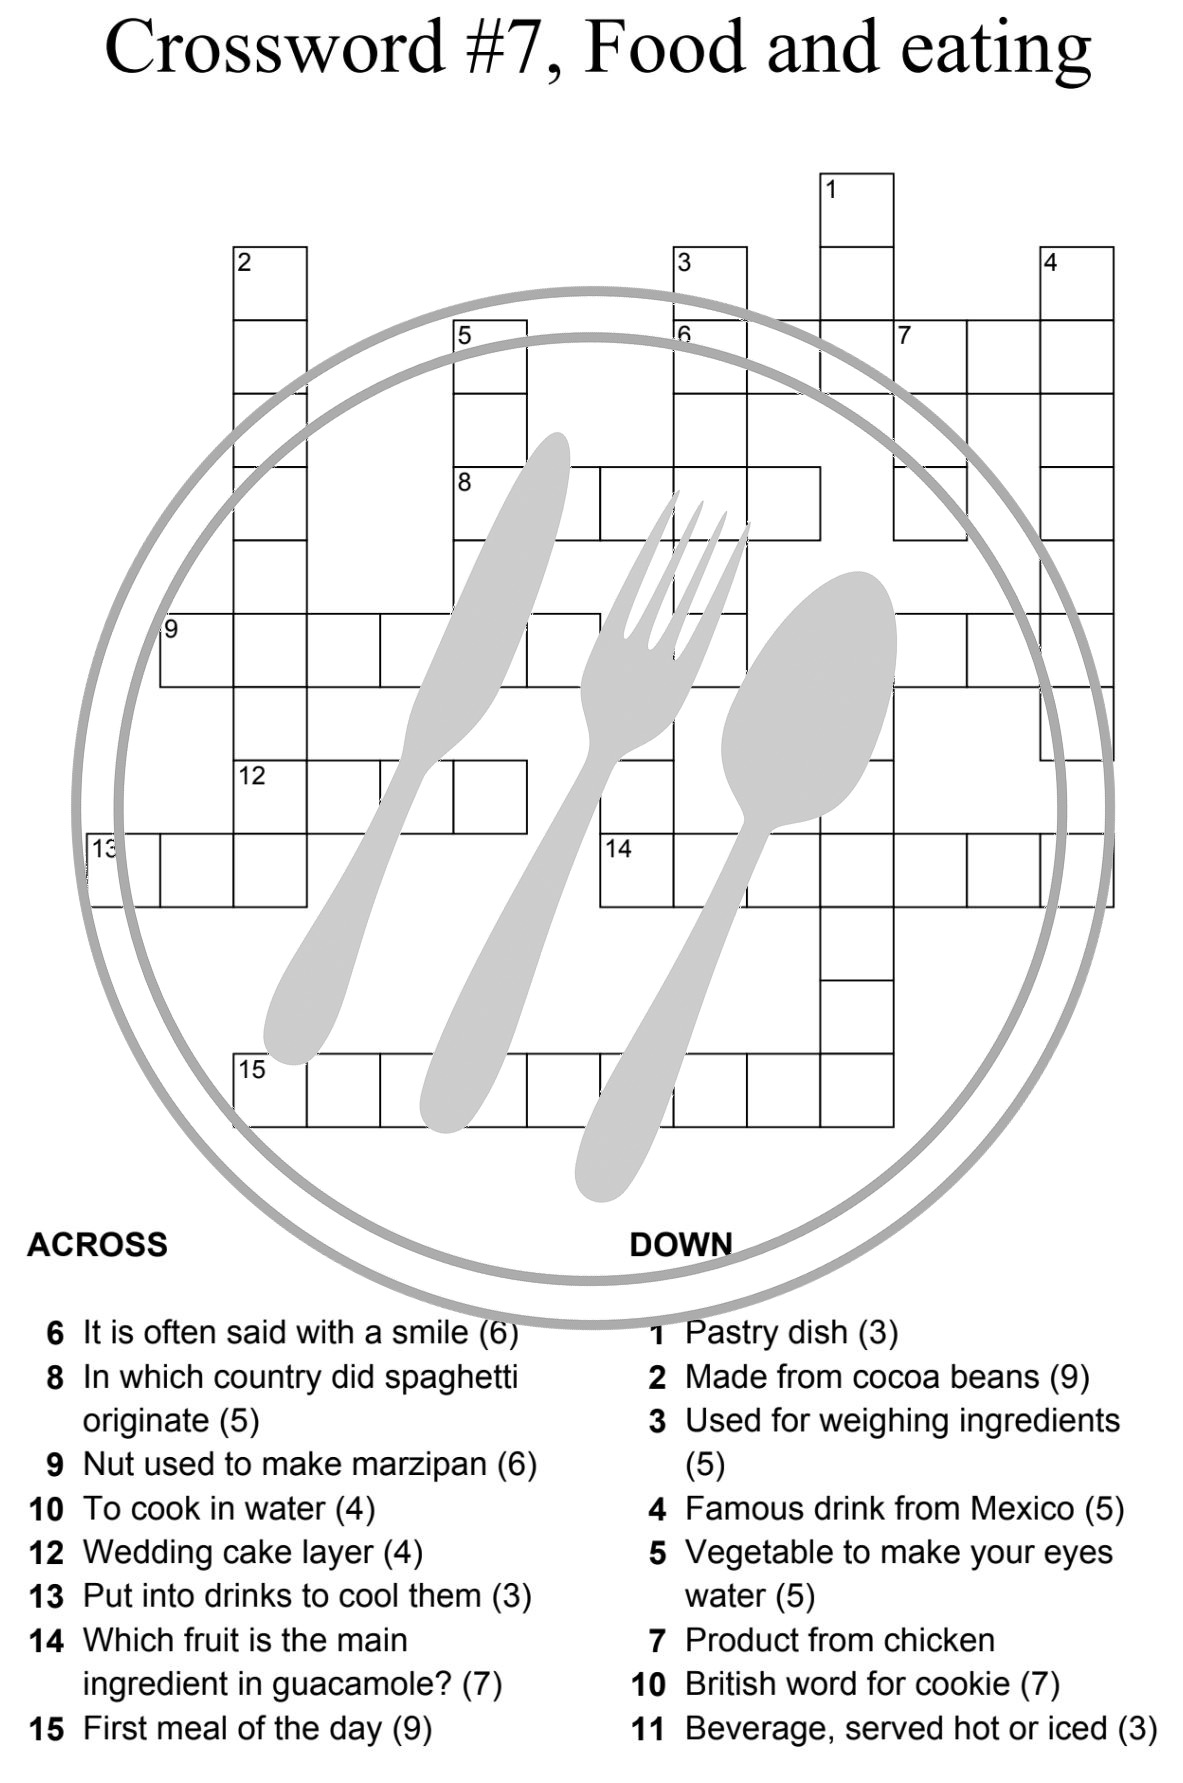 Crossword food and eating